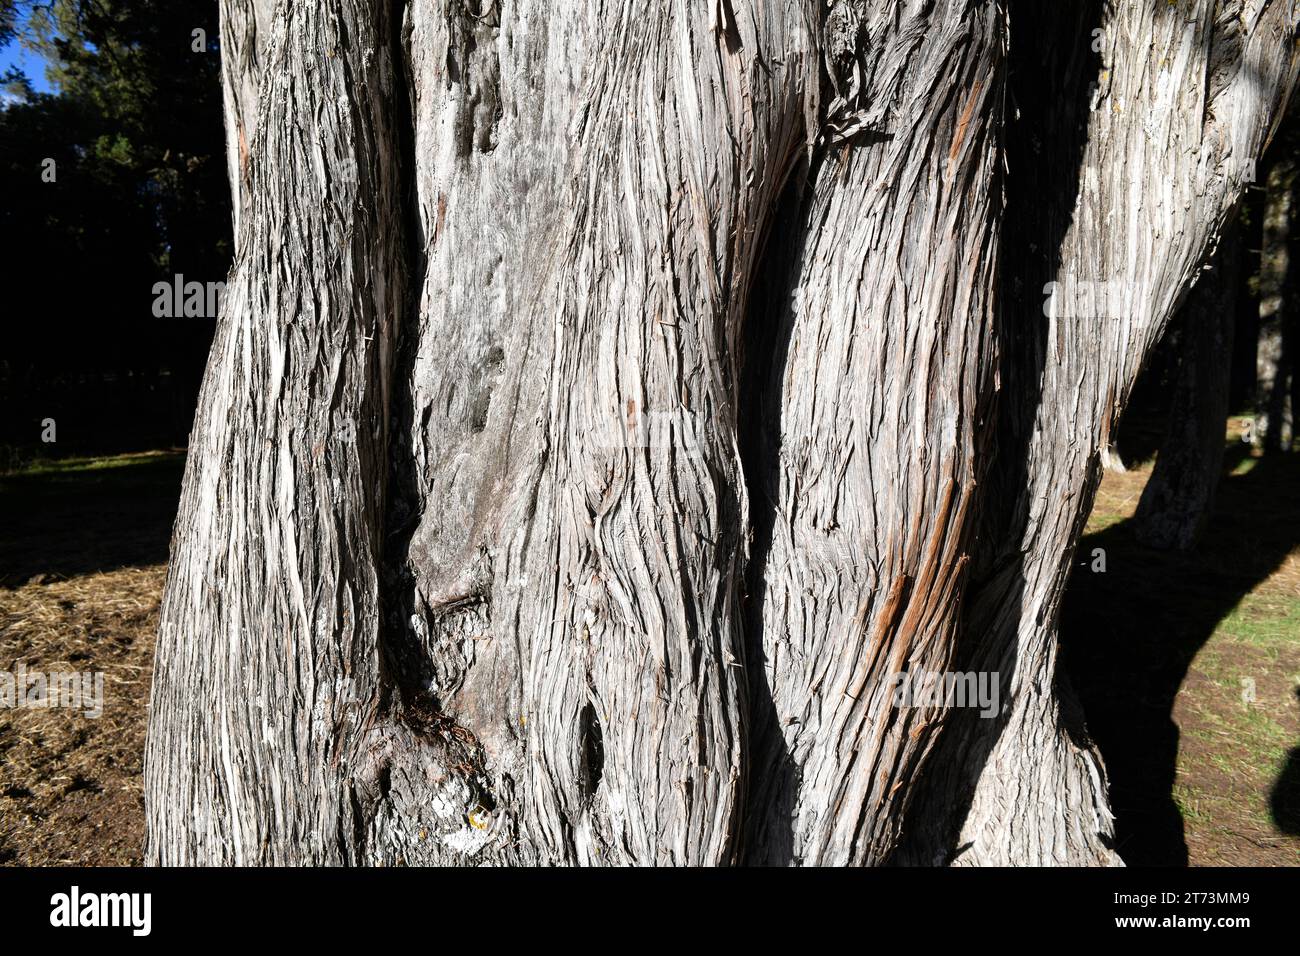 Spanish juniper (Juniperus thurifera) is an evergreen tree native to western Mediterranean mountains, specially in Spain. Bark detail. This photo was Stock Photo